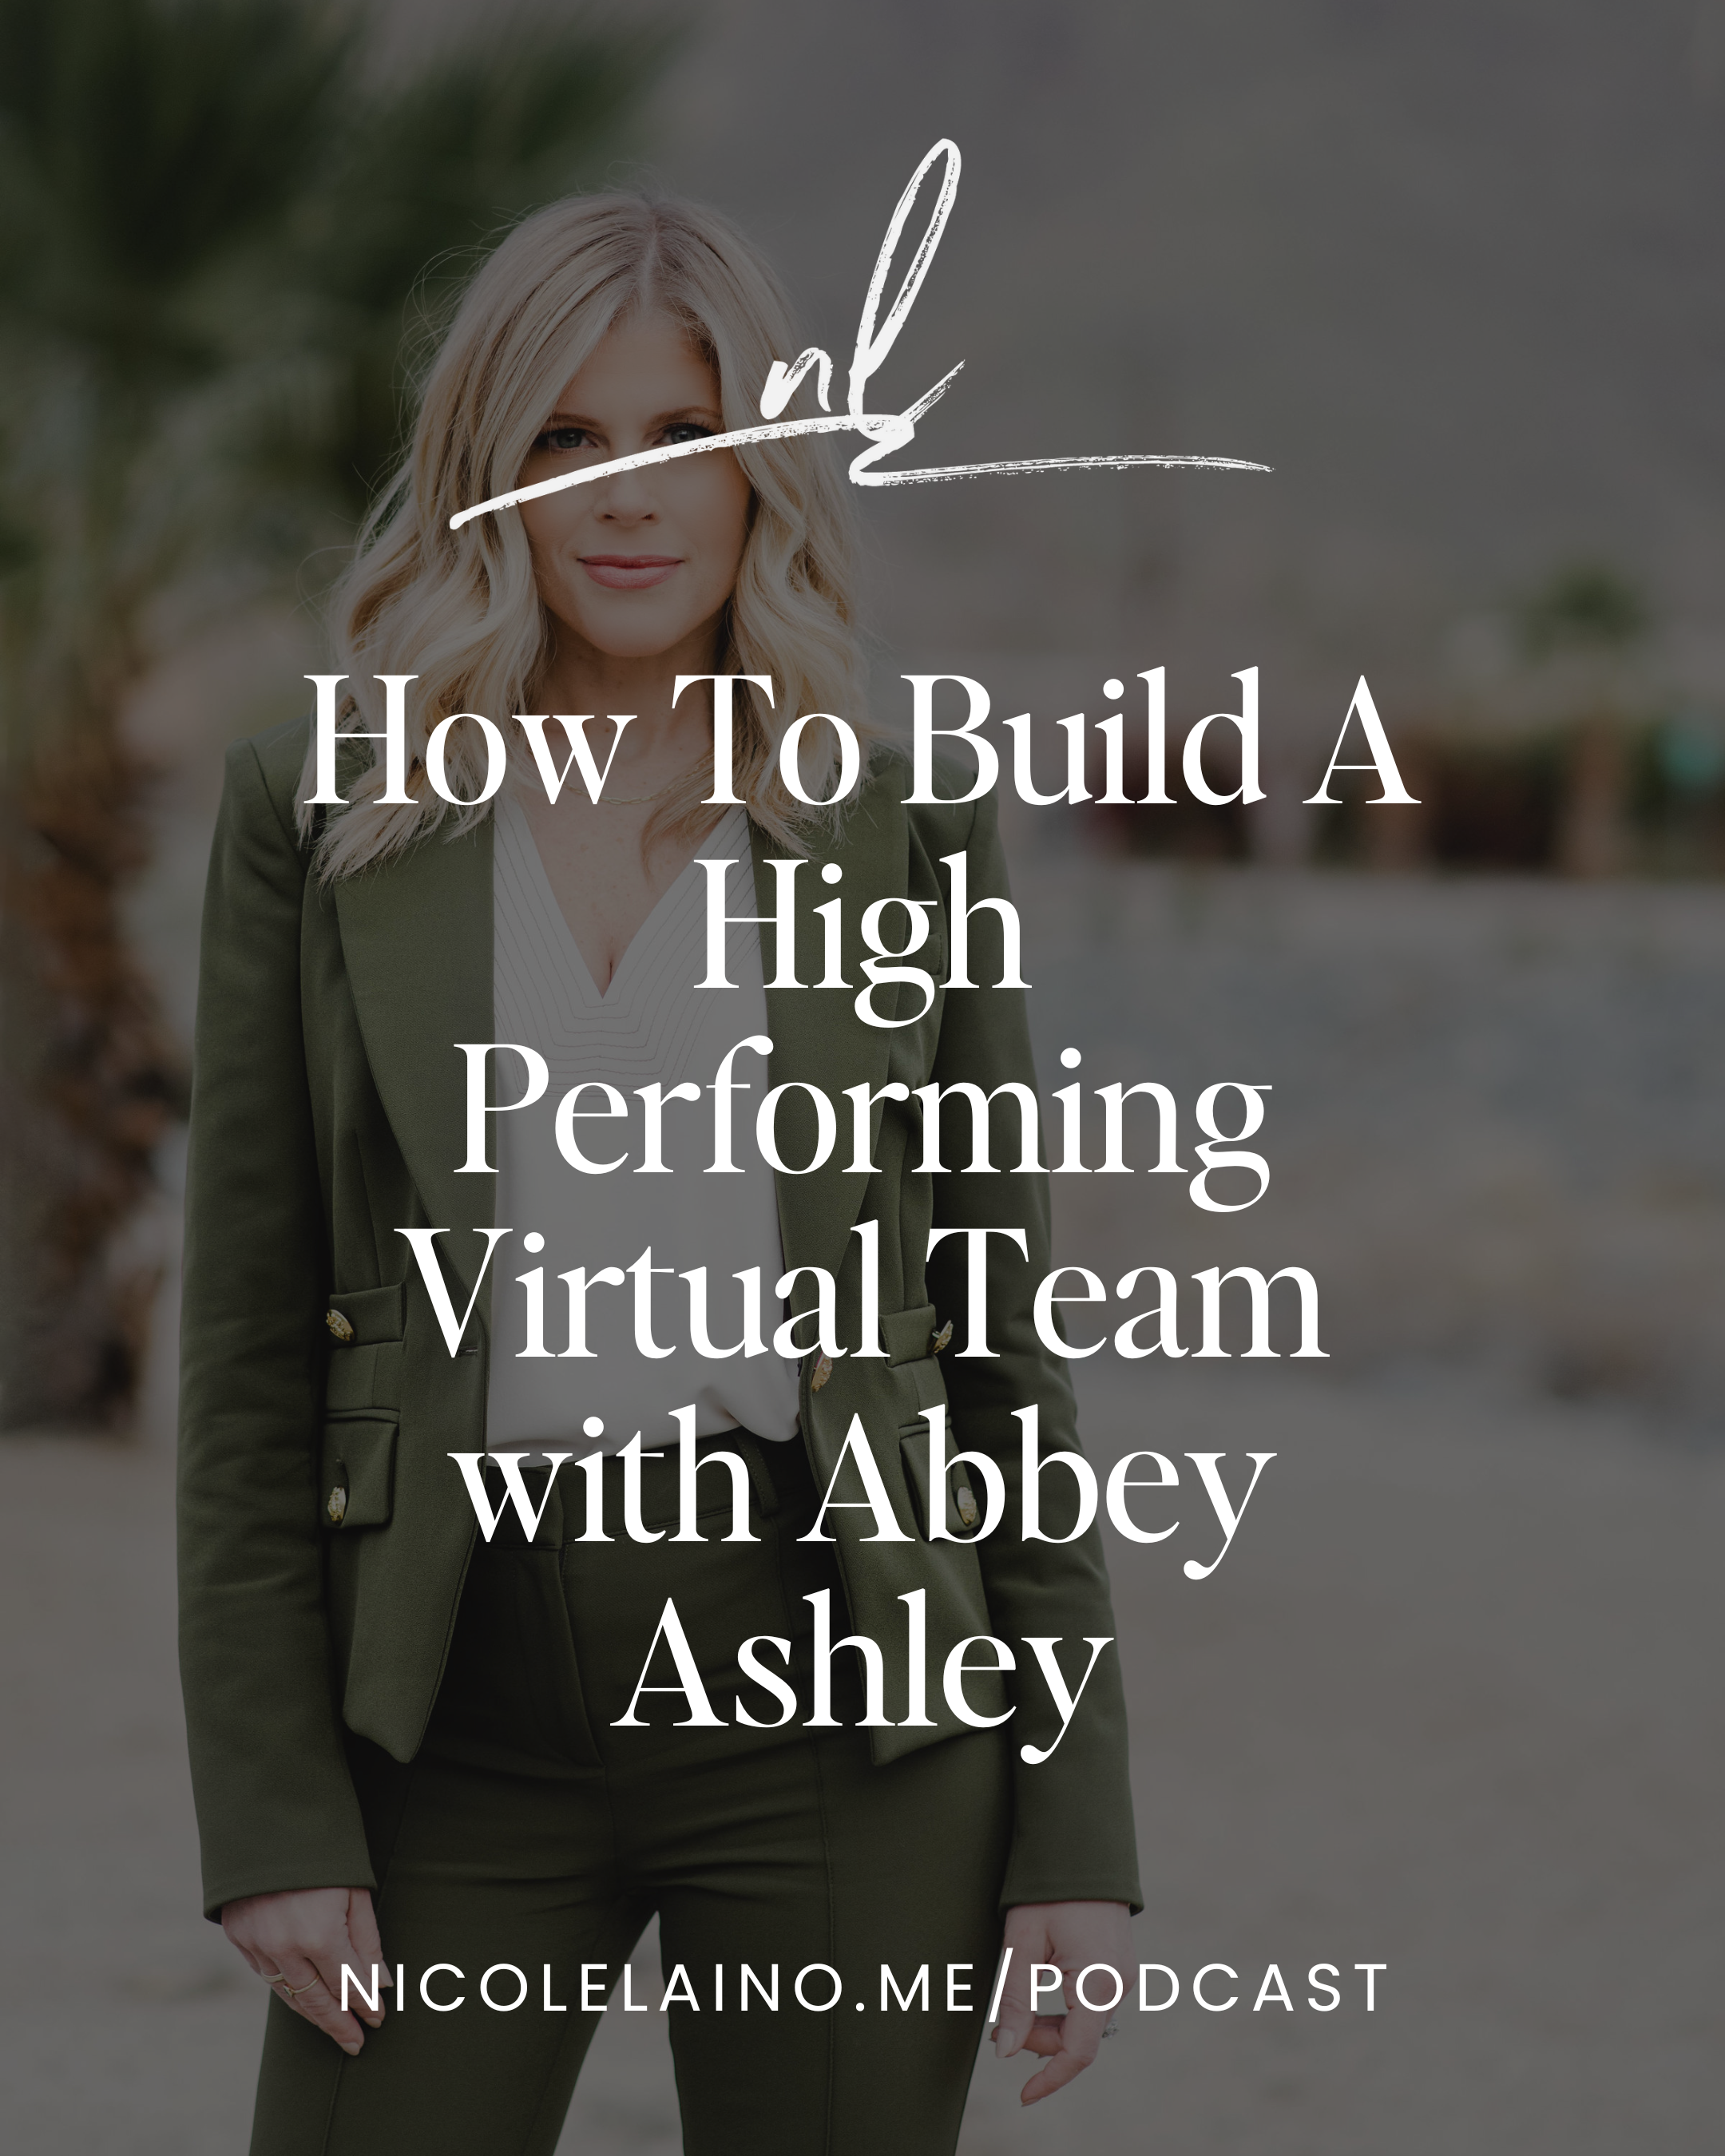 How To Build A High Performing Virtual Team with Abbey Ashley